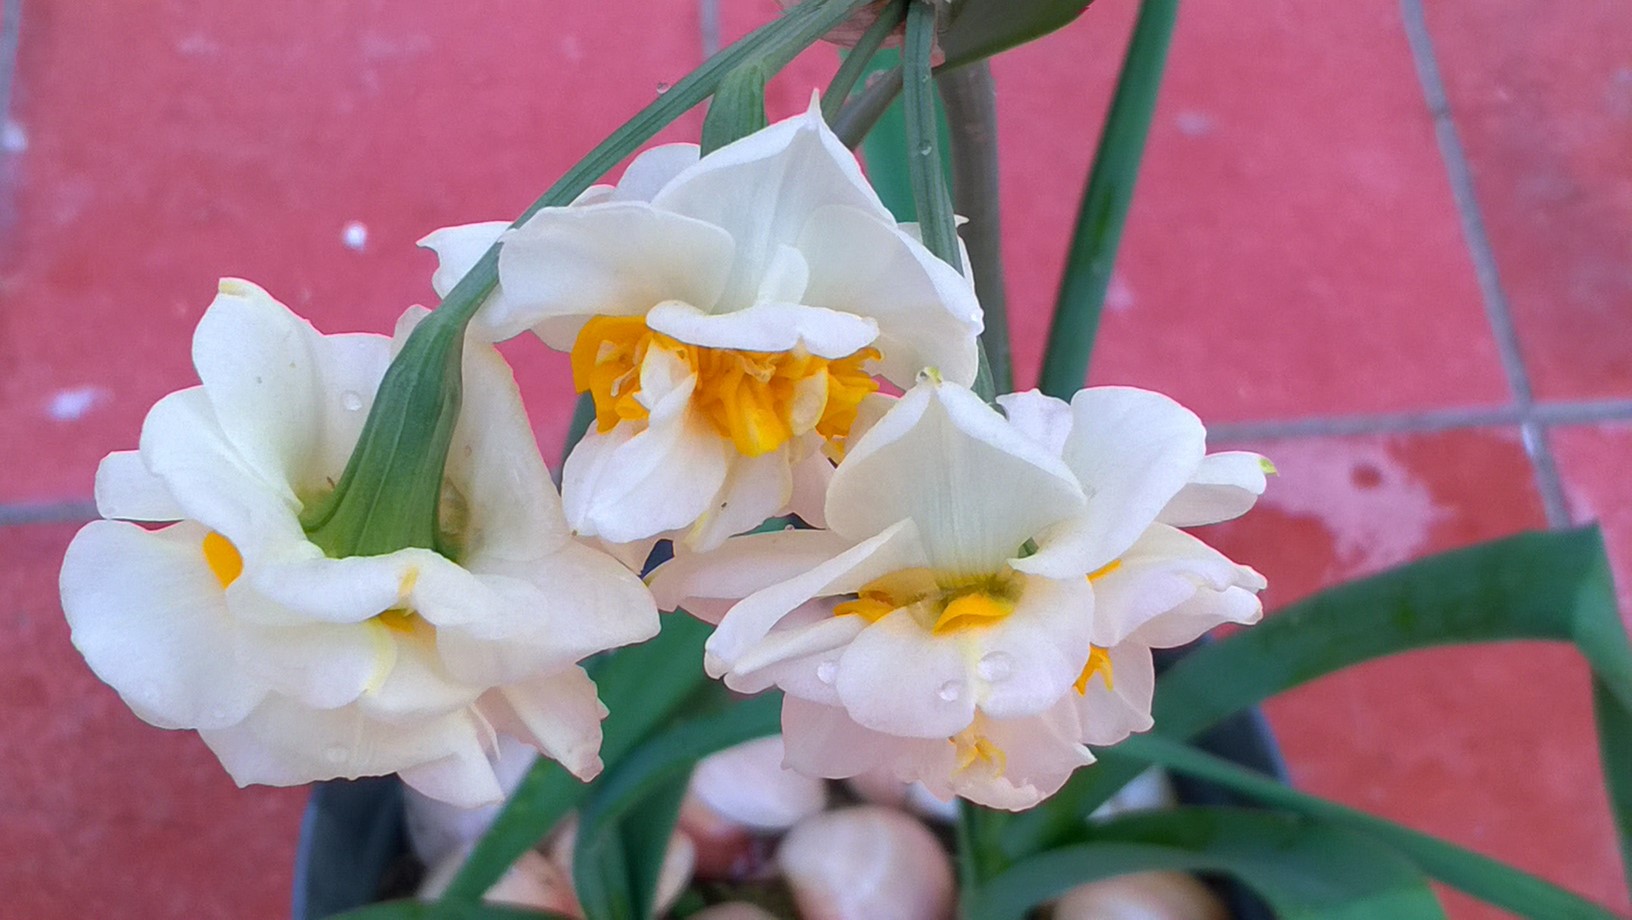 Narcissus is the name of a genus which includes flower bulbs like Daffodils, Jonquils and paperwhites. Narcissus are easily grown from bulbs. These easy-care flowering add bright spots of sunshine that will return year after year.